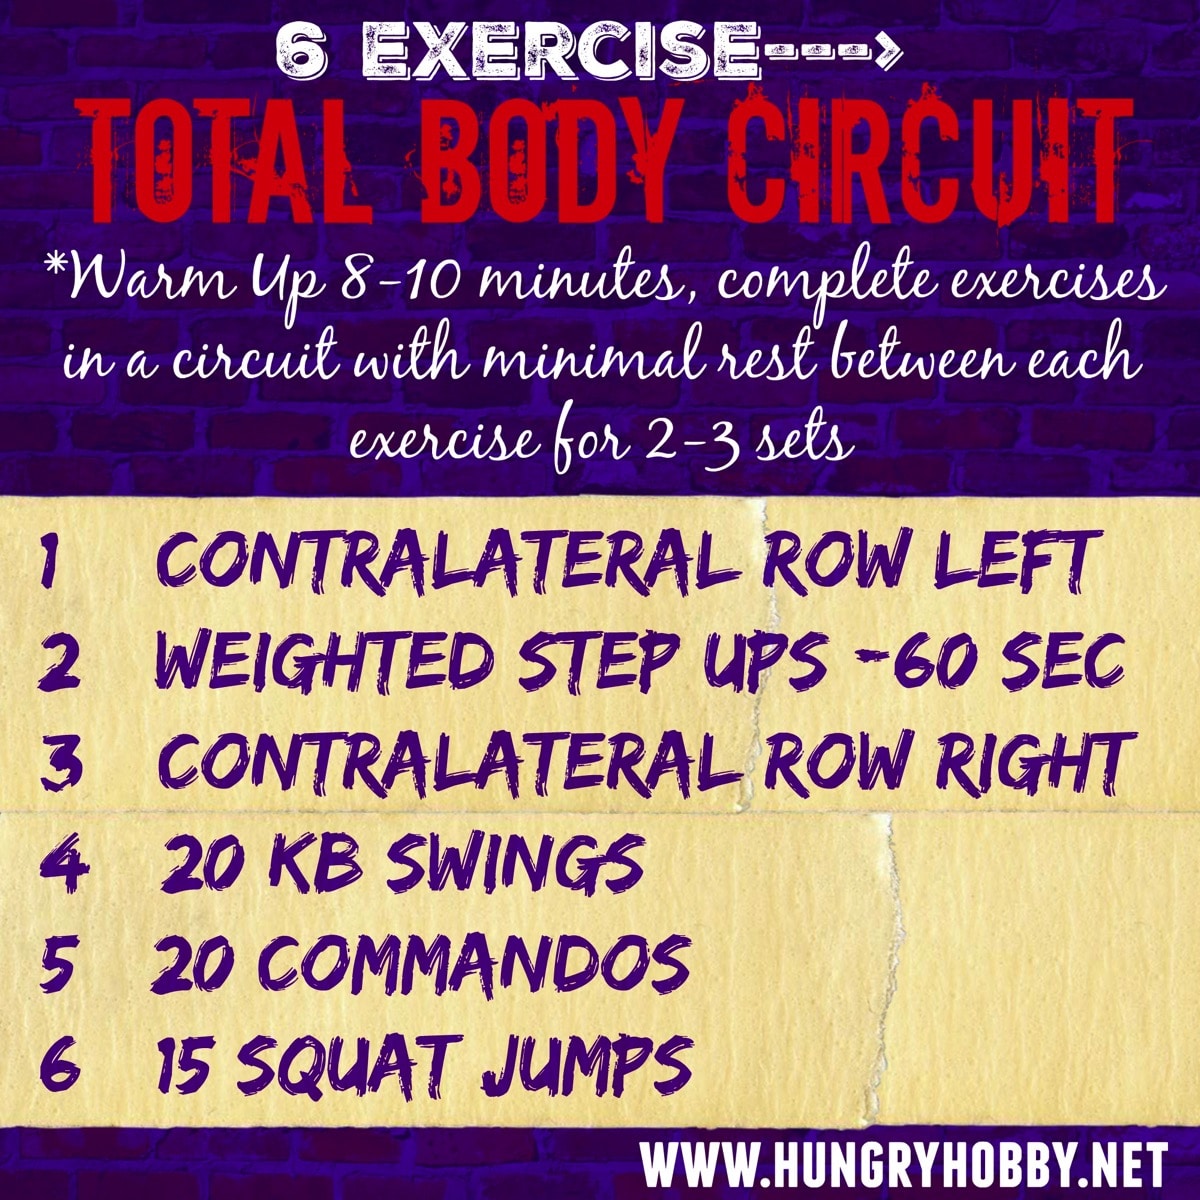 6 Exercise Total Body Circuit